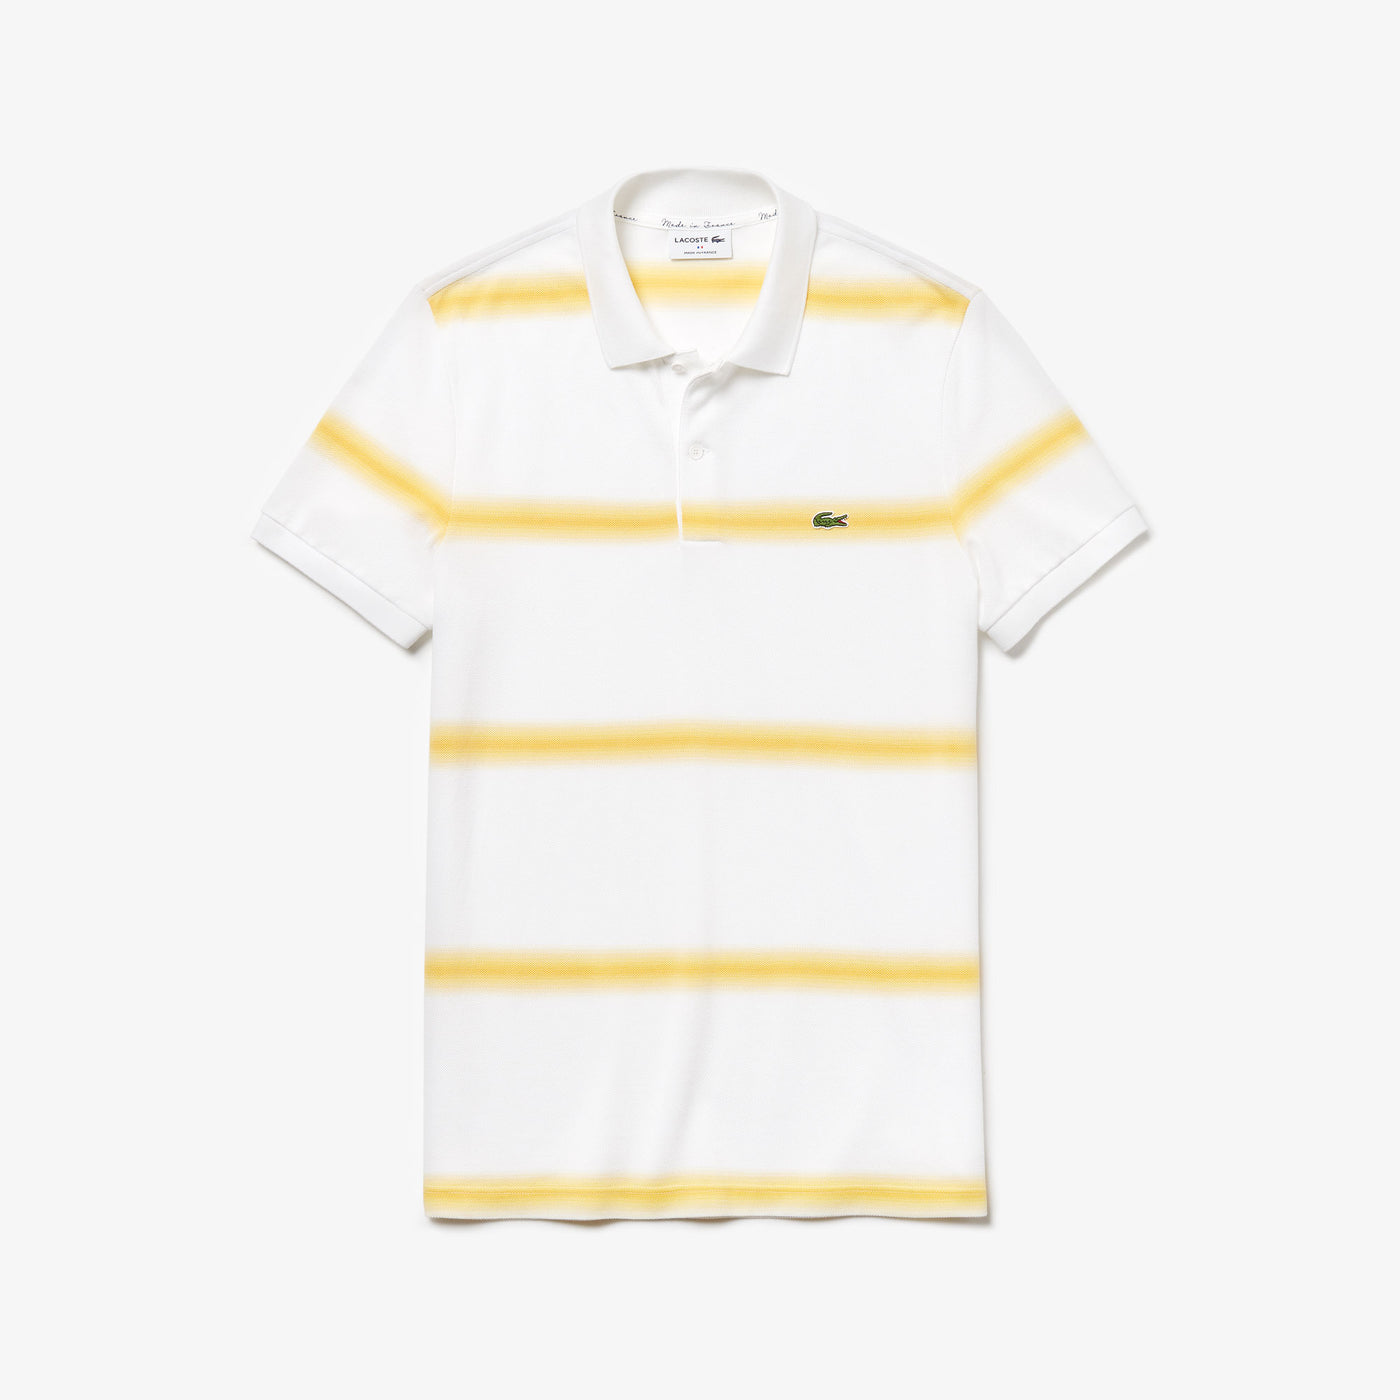 MEN'S LACOSTE MADE IN FRANCE REGULAR FIT COTTON PIQUÉ POLO SHIRT - MyHoldal